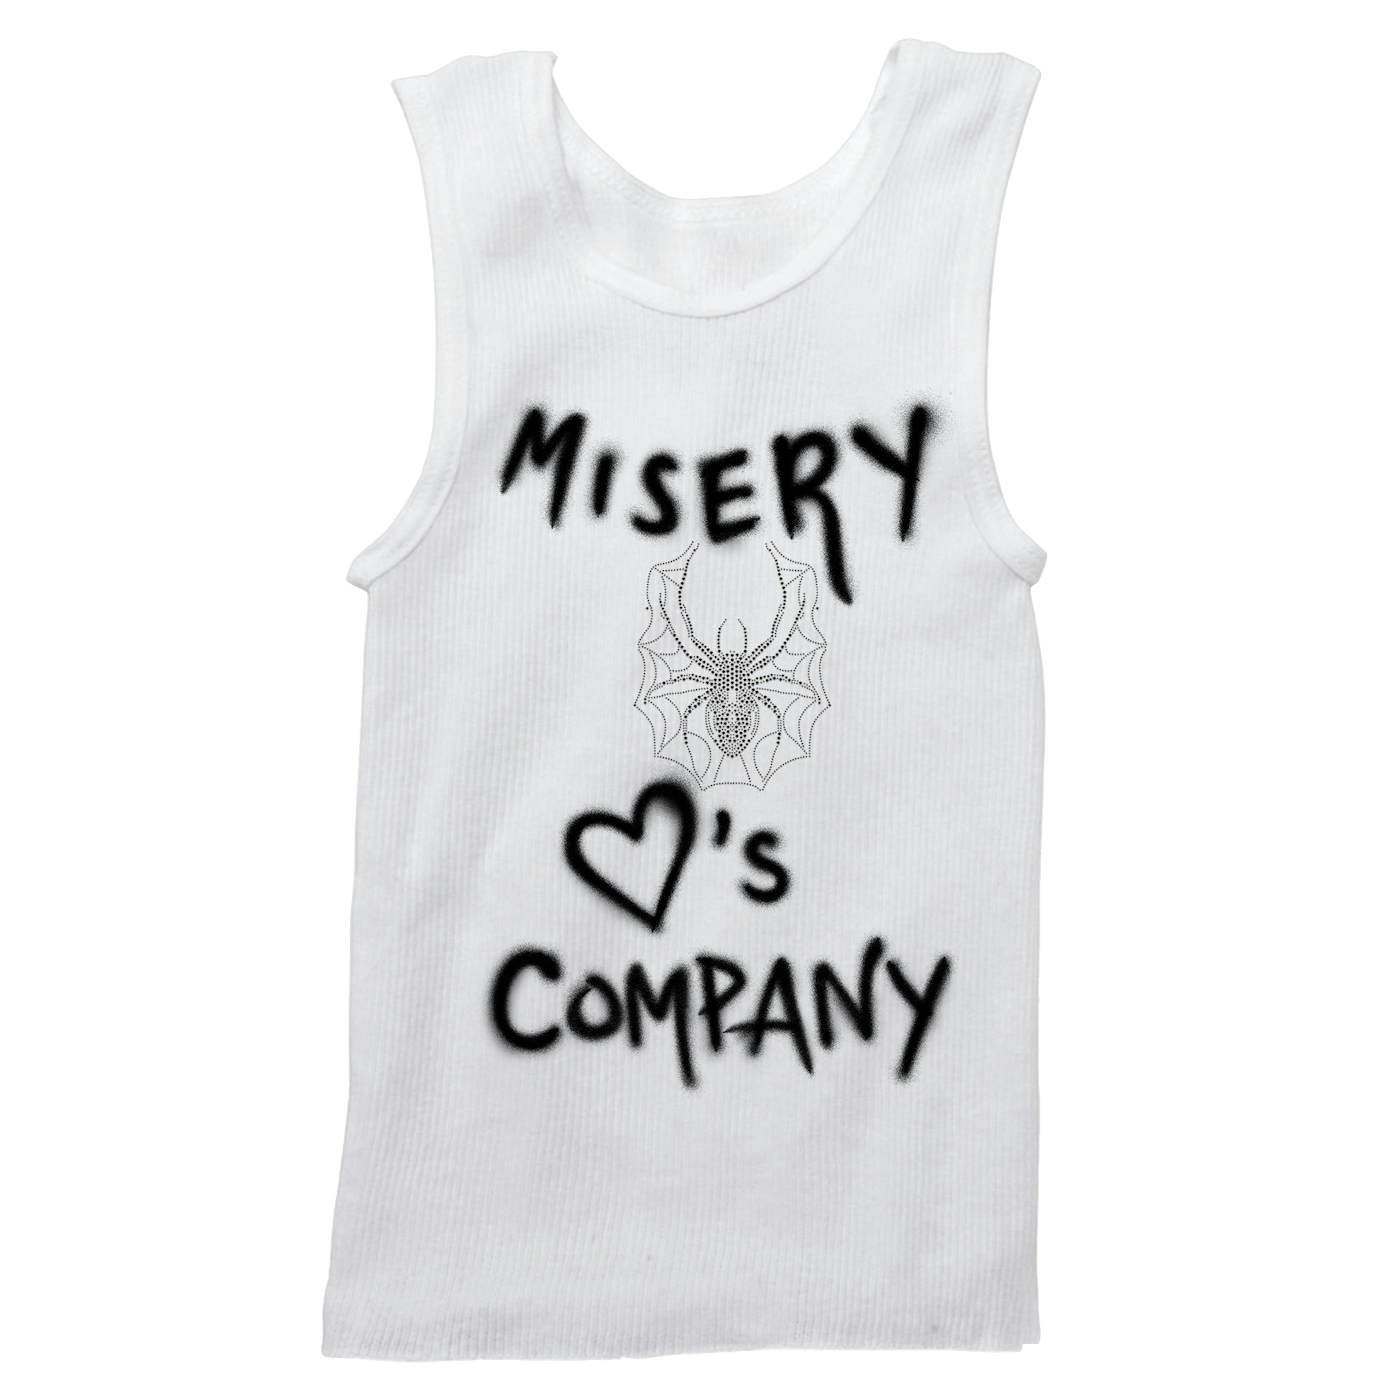 Miley Cyrus Misery Loves Company Tank Top